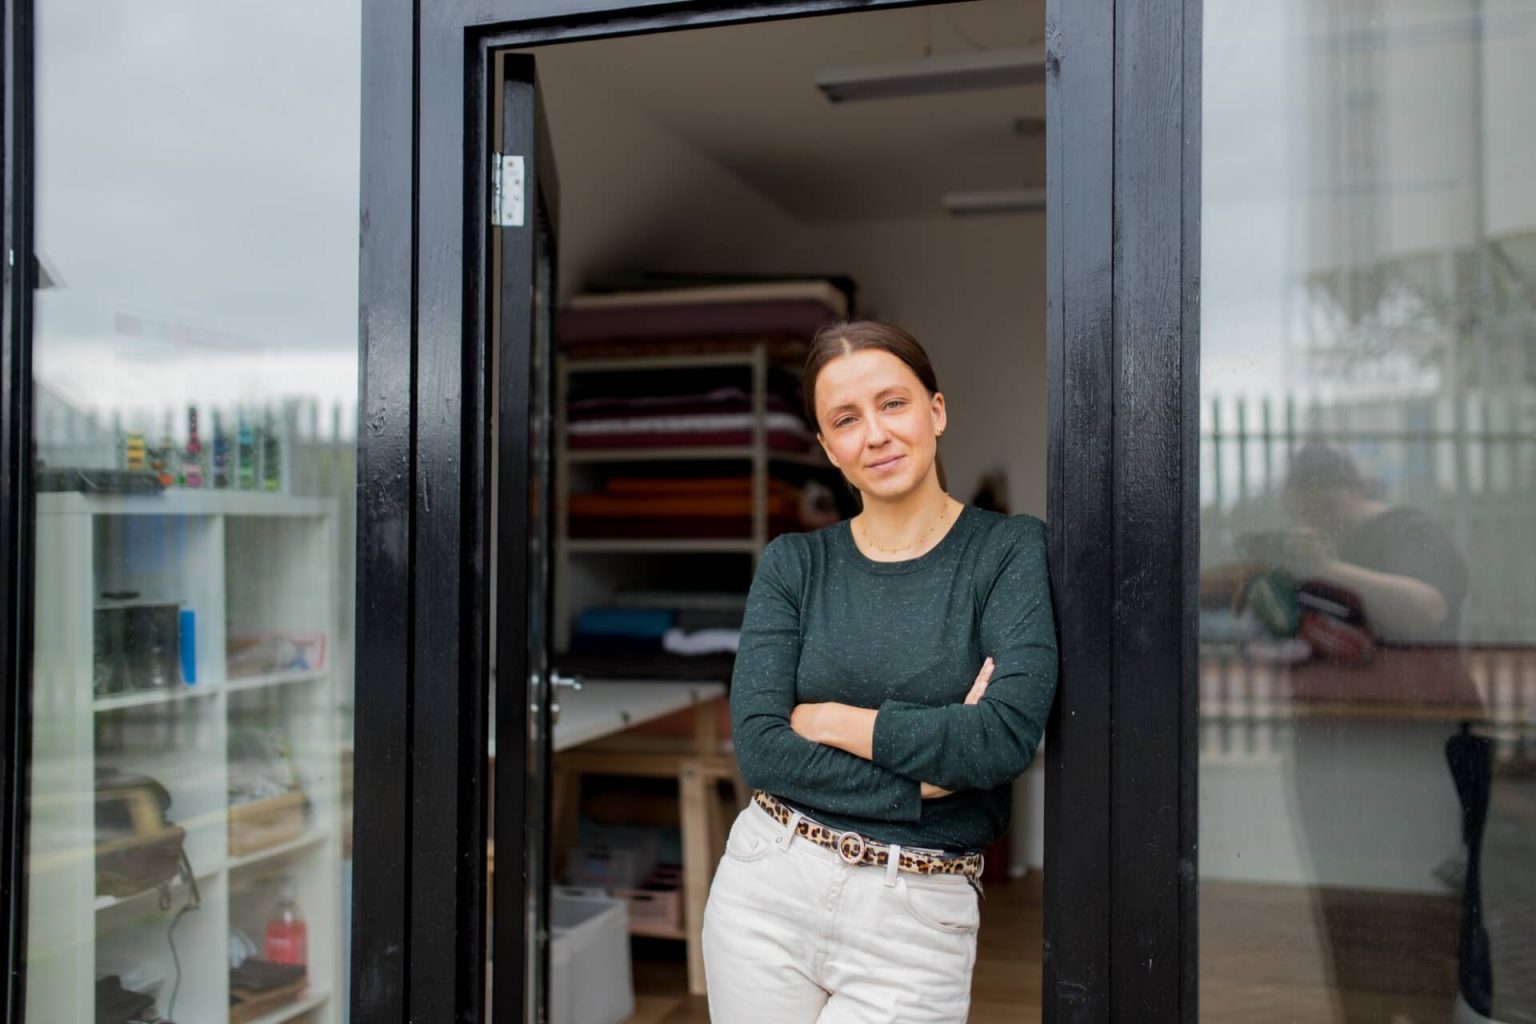 Polina, owner of Good Fabric store